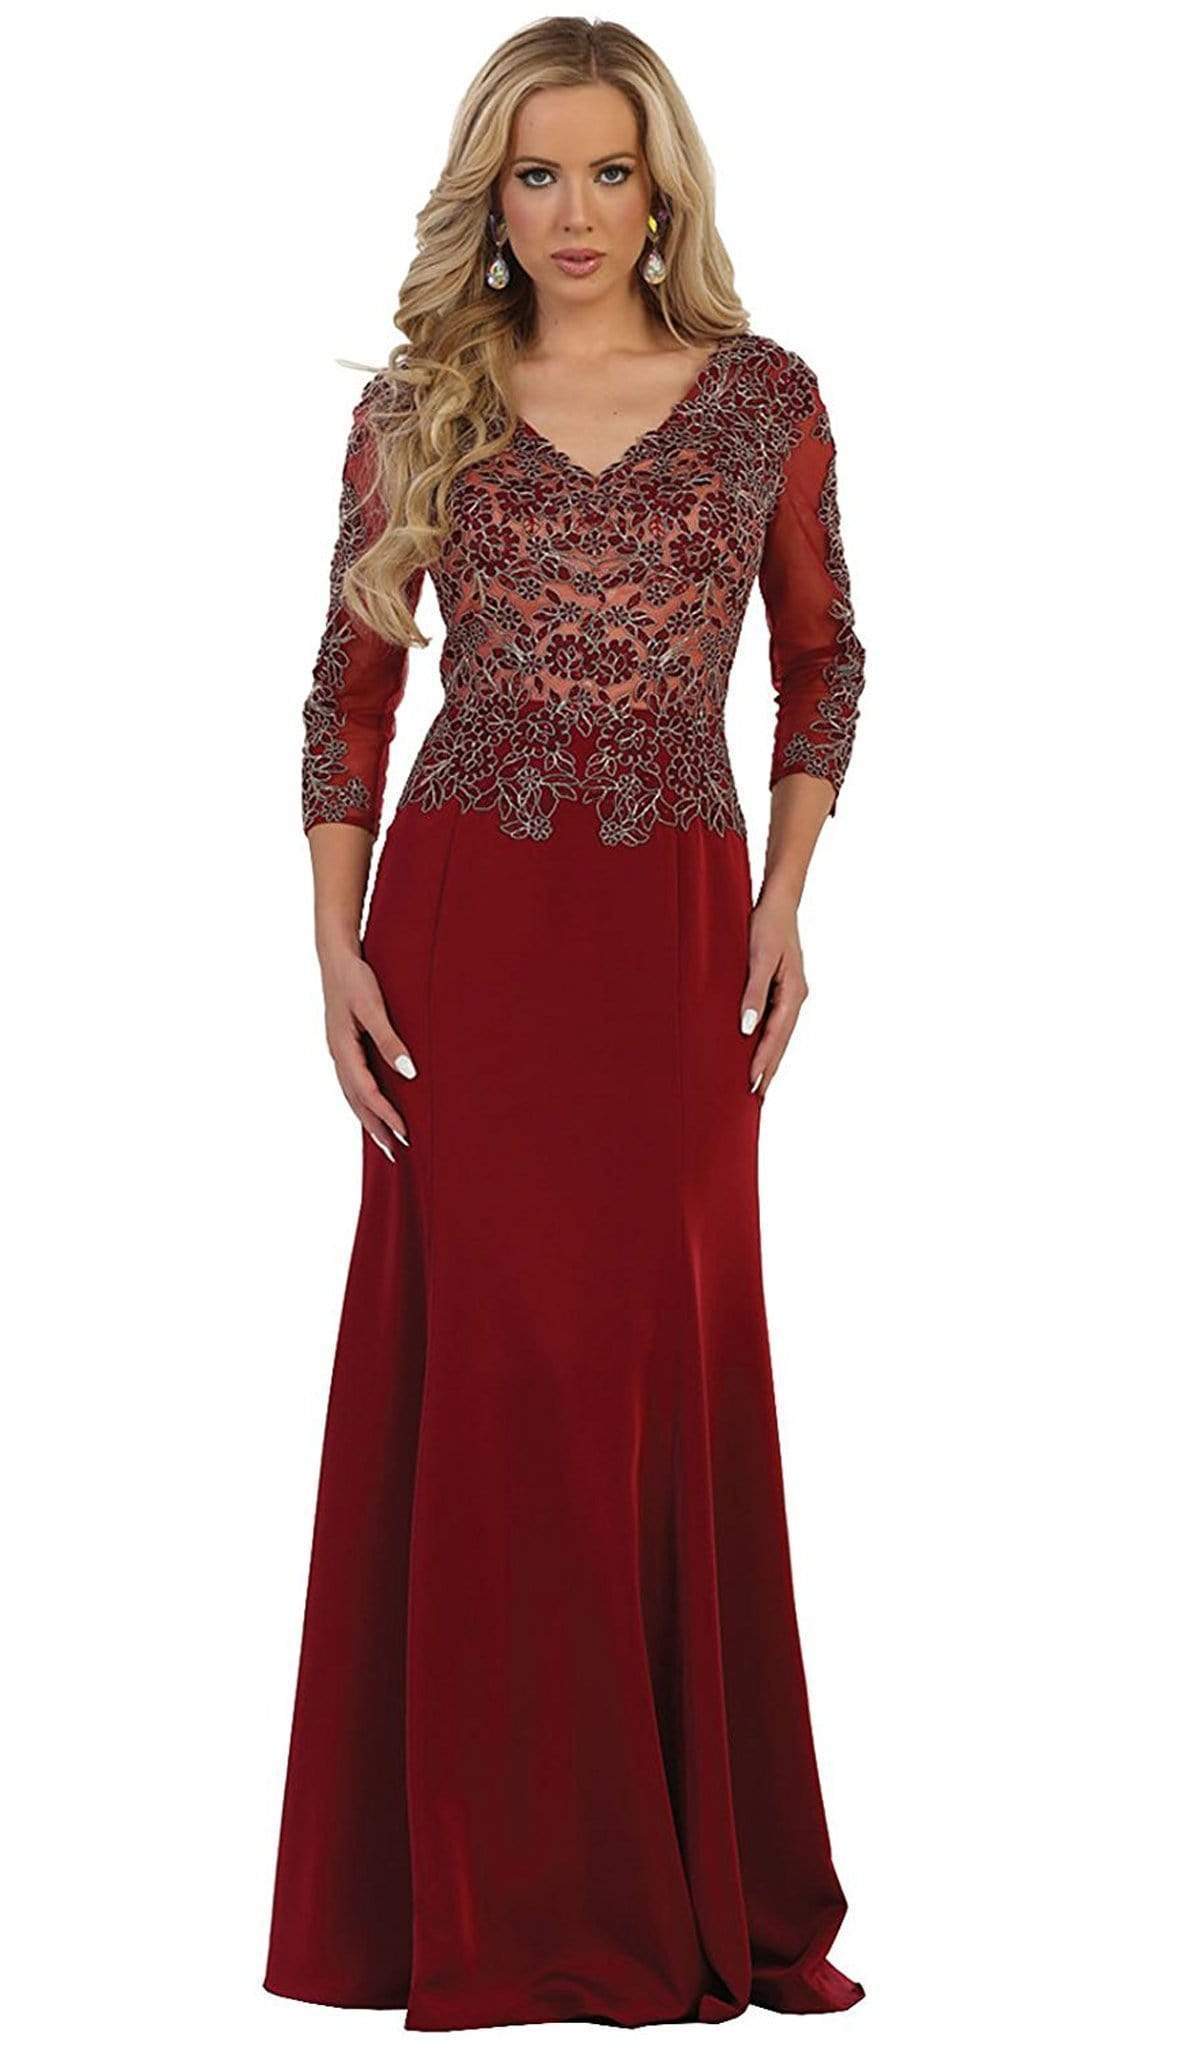 May Queen - MQ1505 Quarter Length Sleeve Lace Sheath Evening Dress Mother of the Bride Dresses M / Burgundy